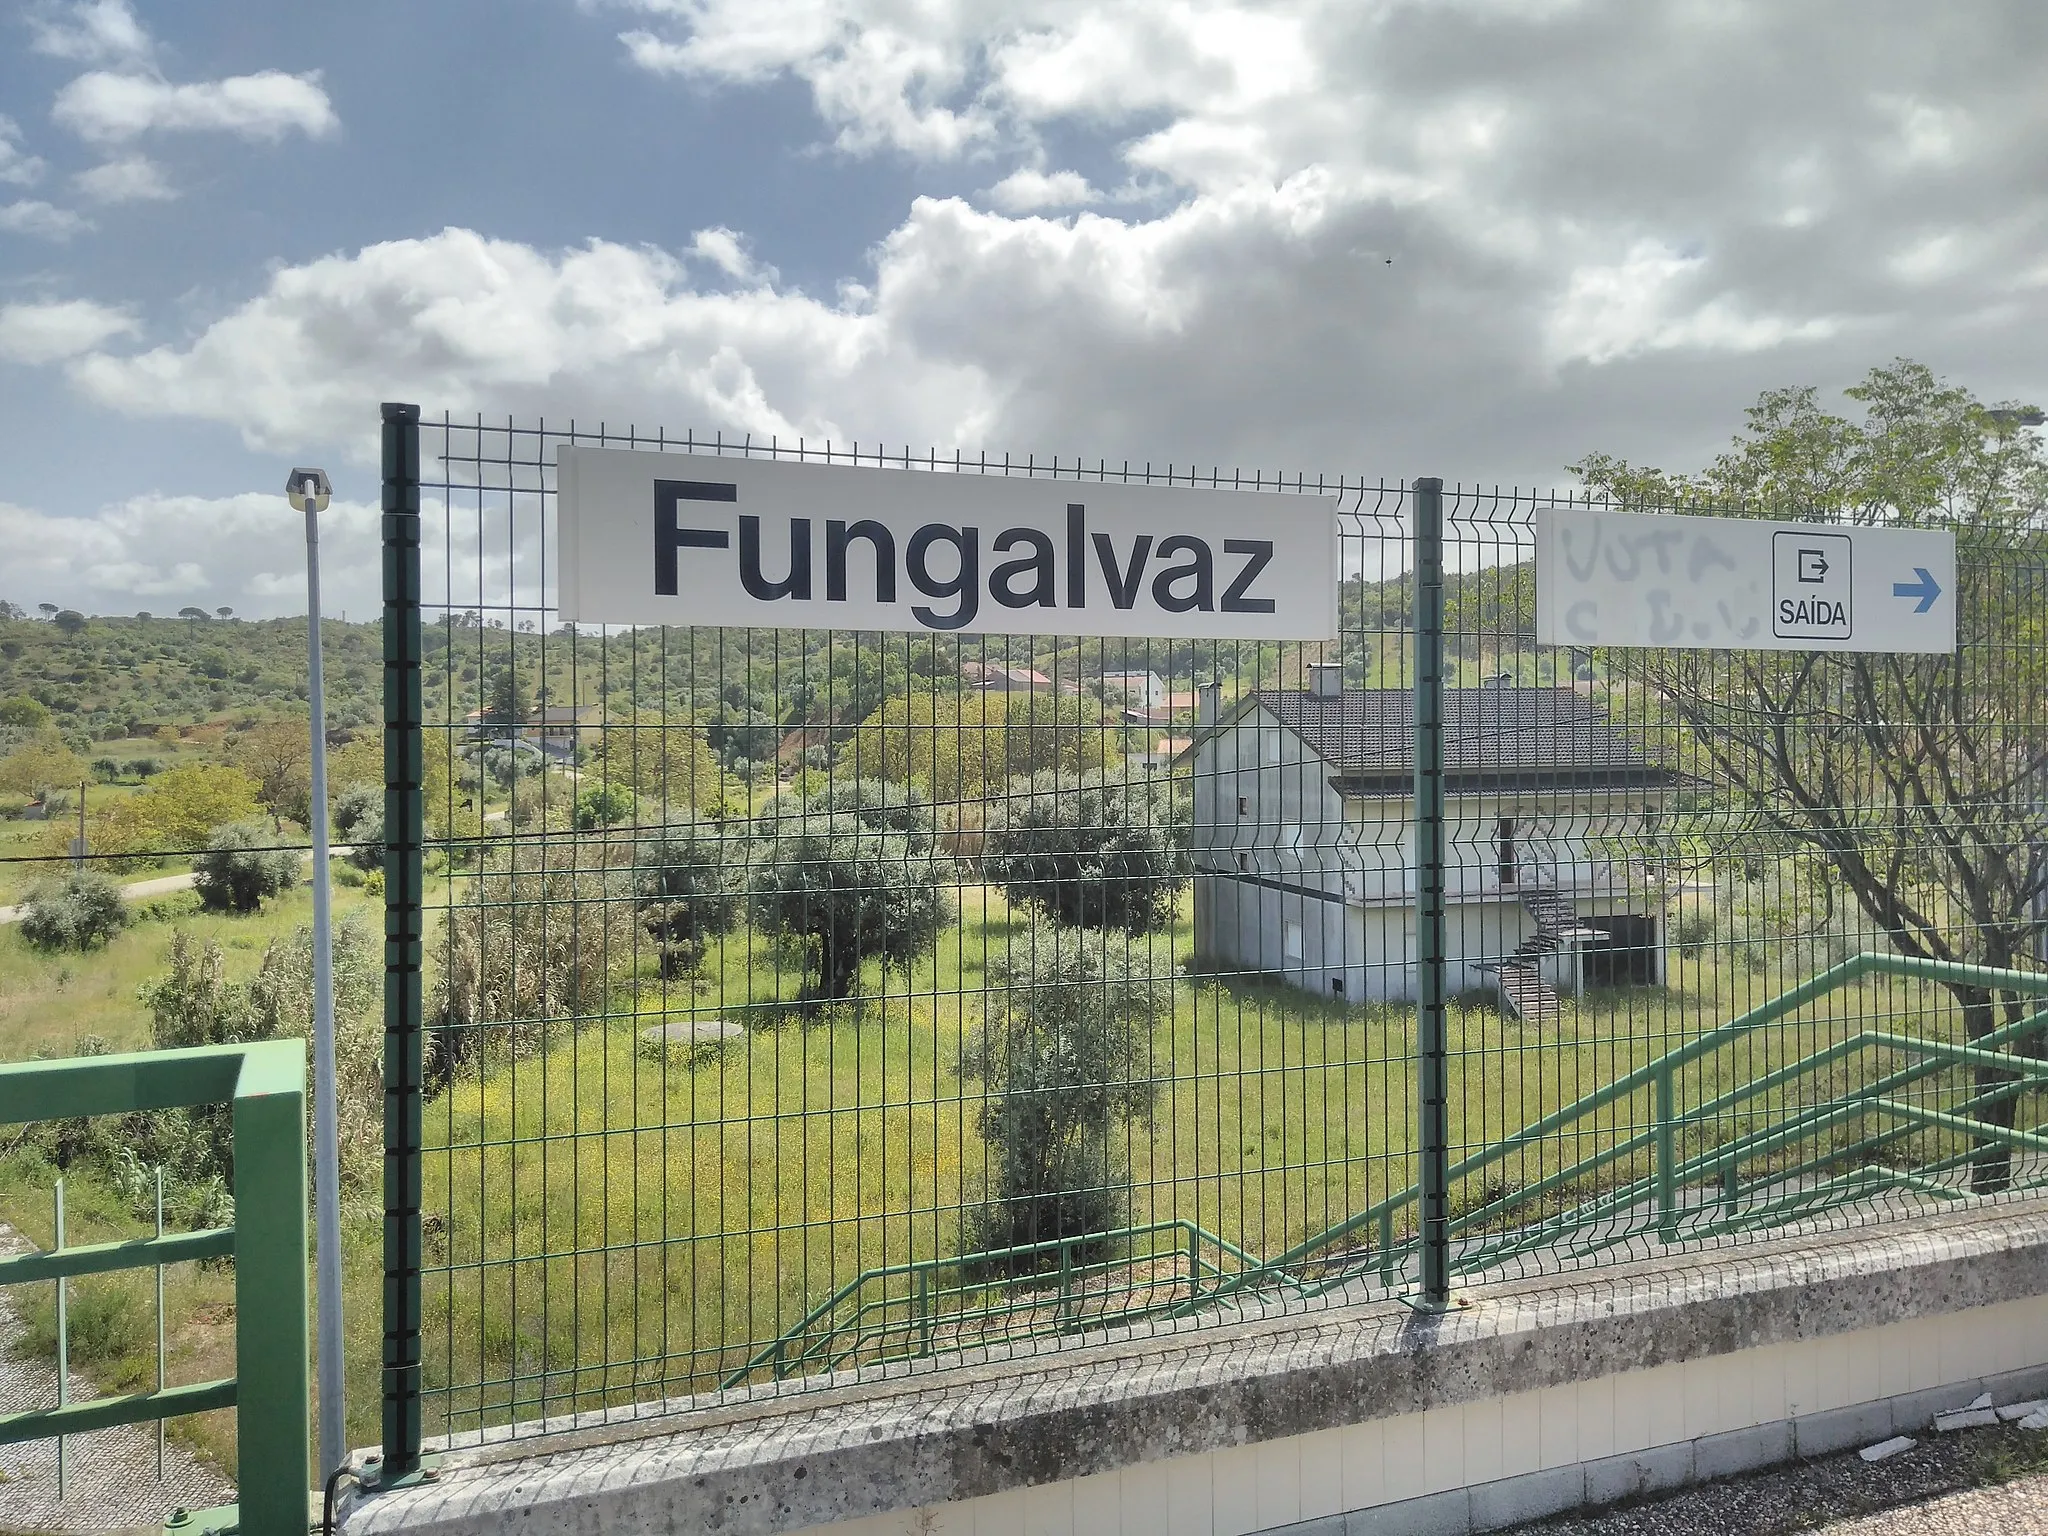 Photo showing: Fencing and sign for Fungalvaz halt